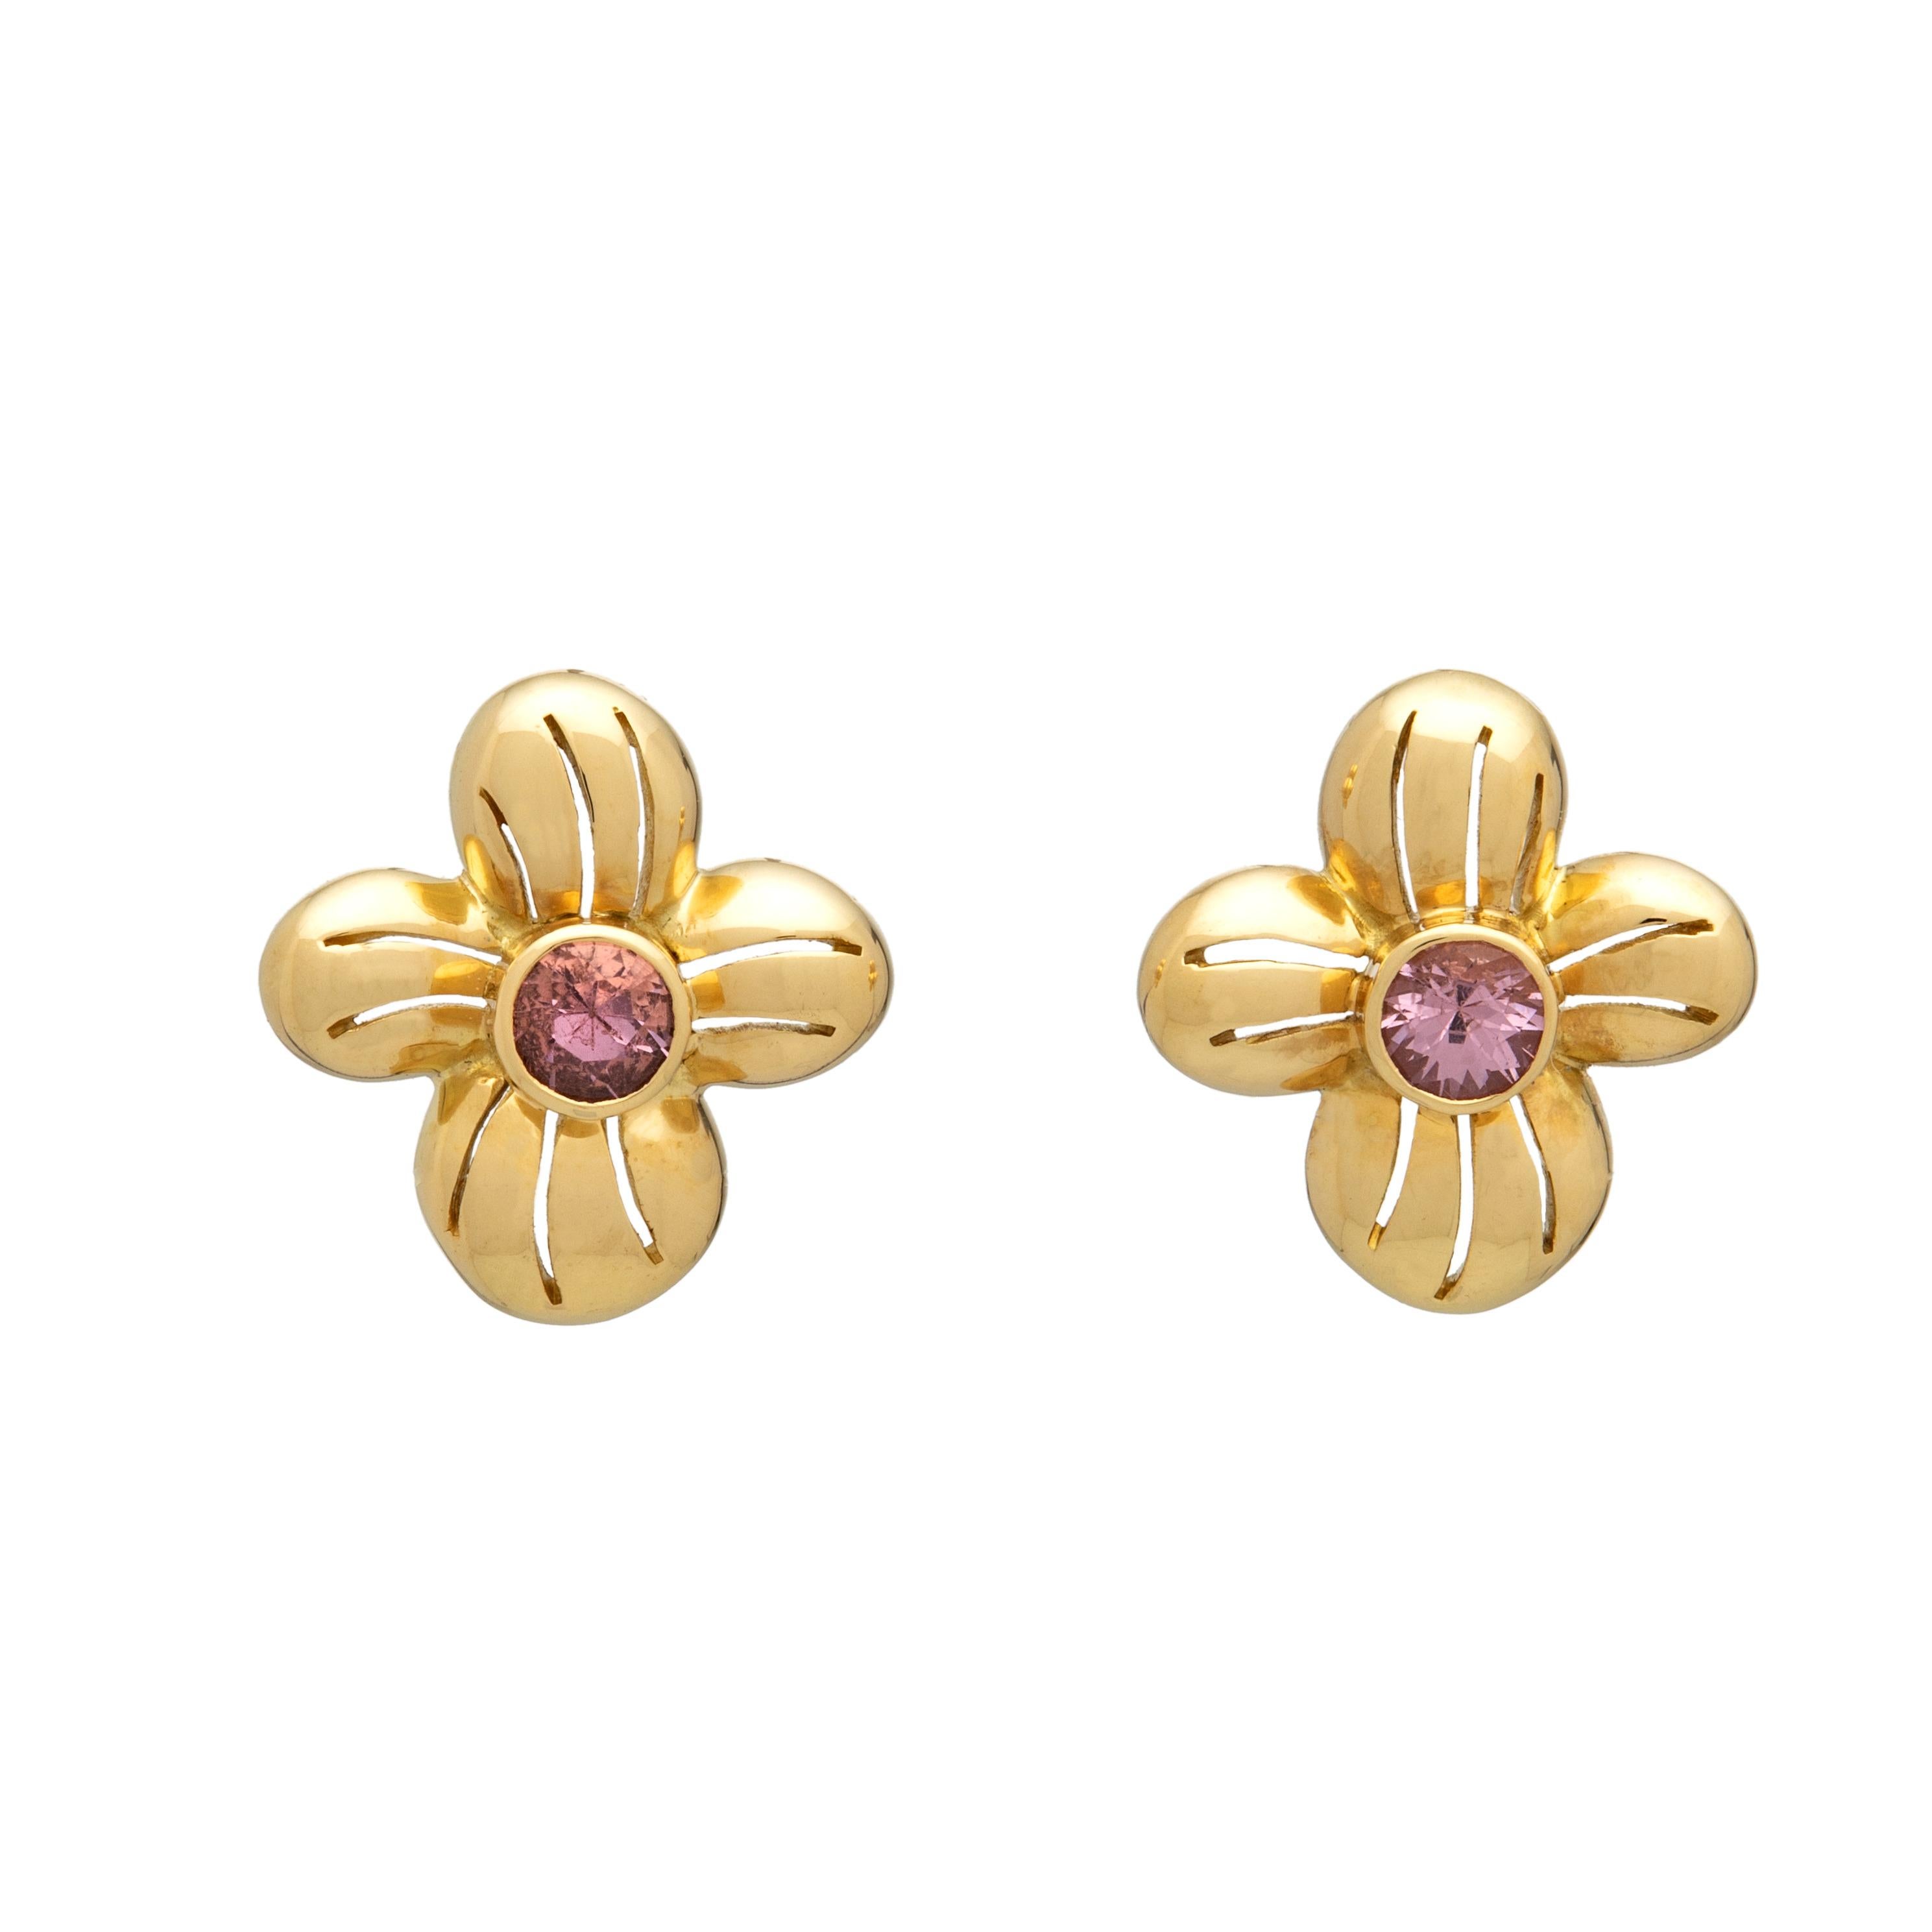 These 18k yellow gold earrings are crafted into flowers with pierced petals and a bright polished finish. Further enhancing these earrings are the two light pink spinels bezel set in the pistils of the flowers for an added punch of colour. Fun, yet